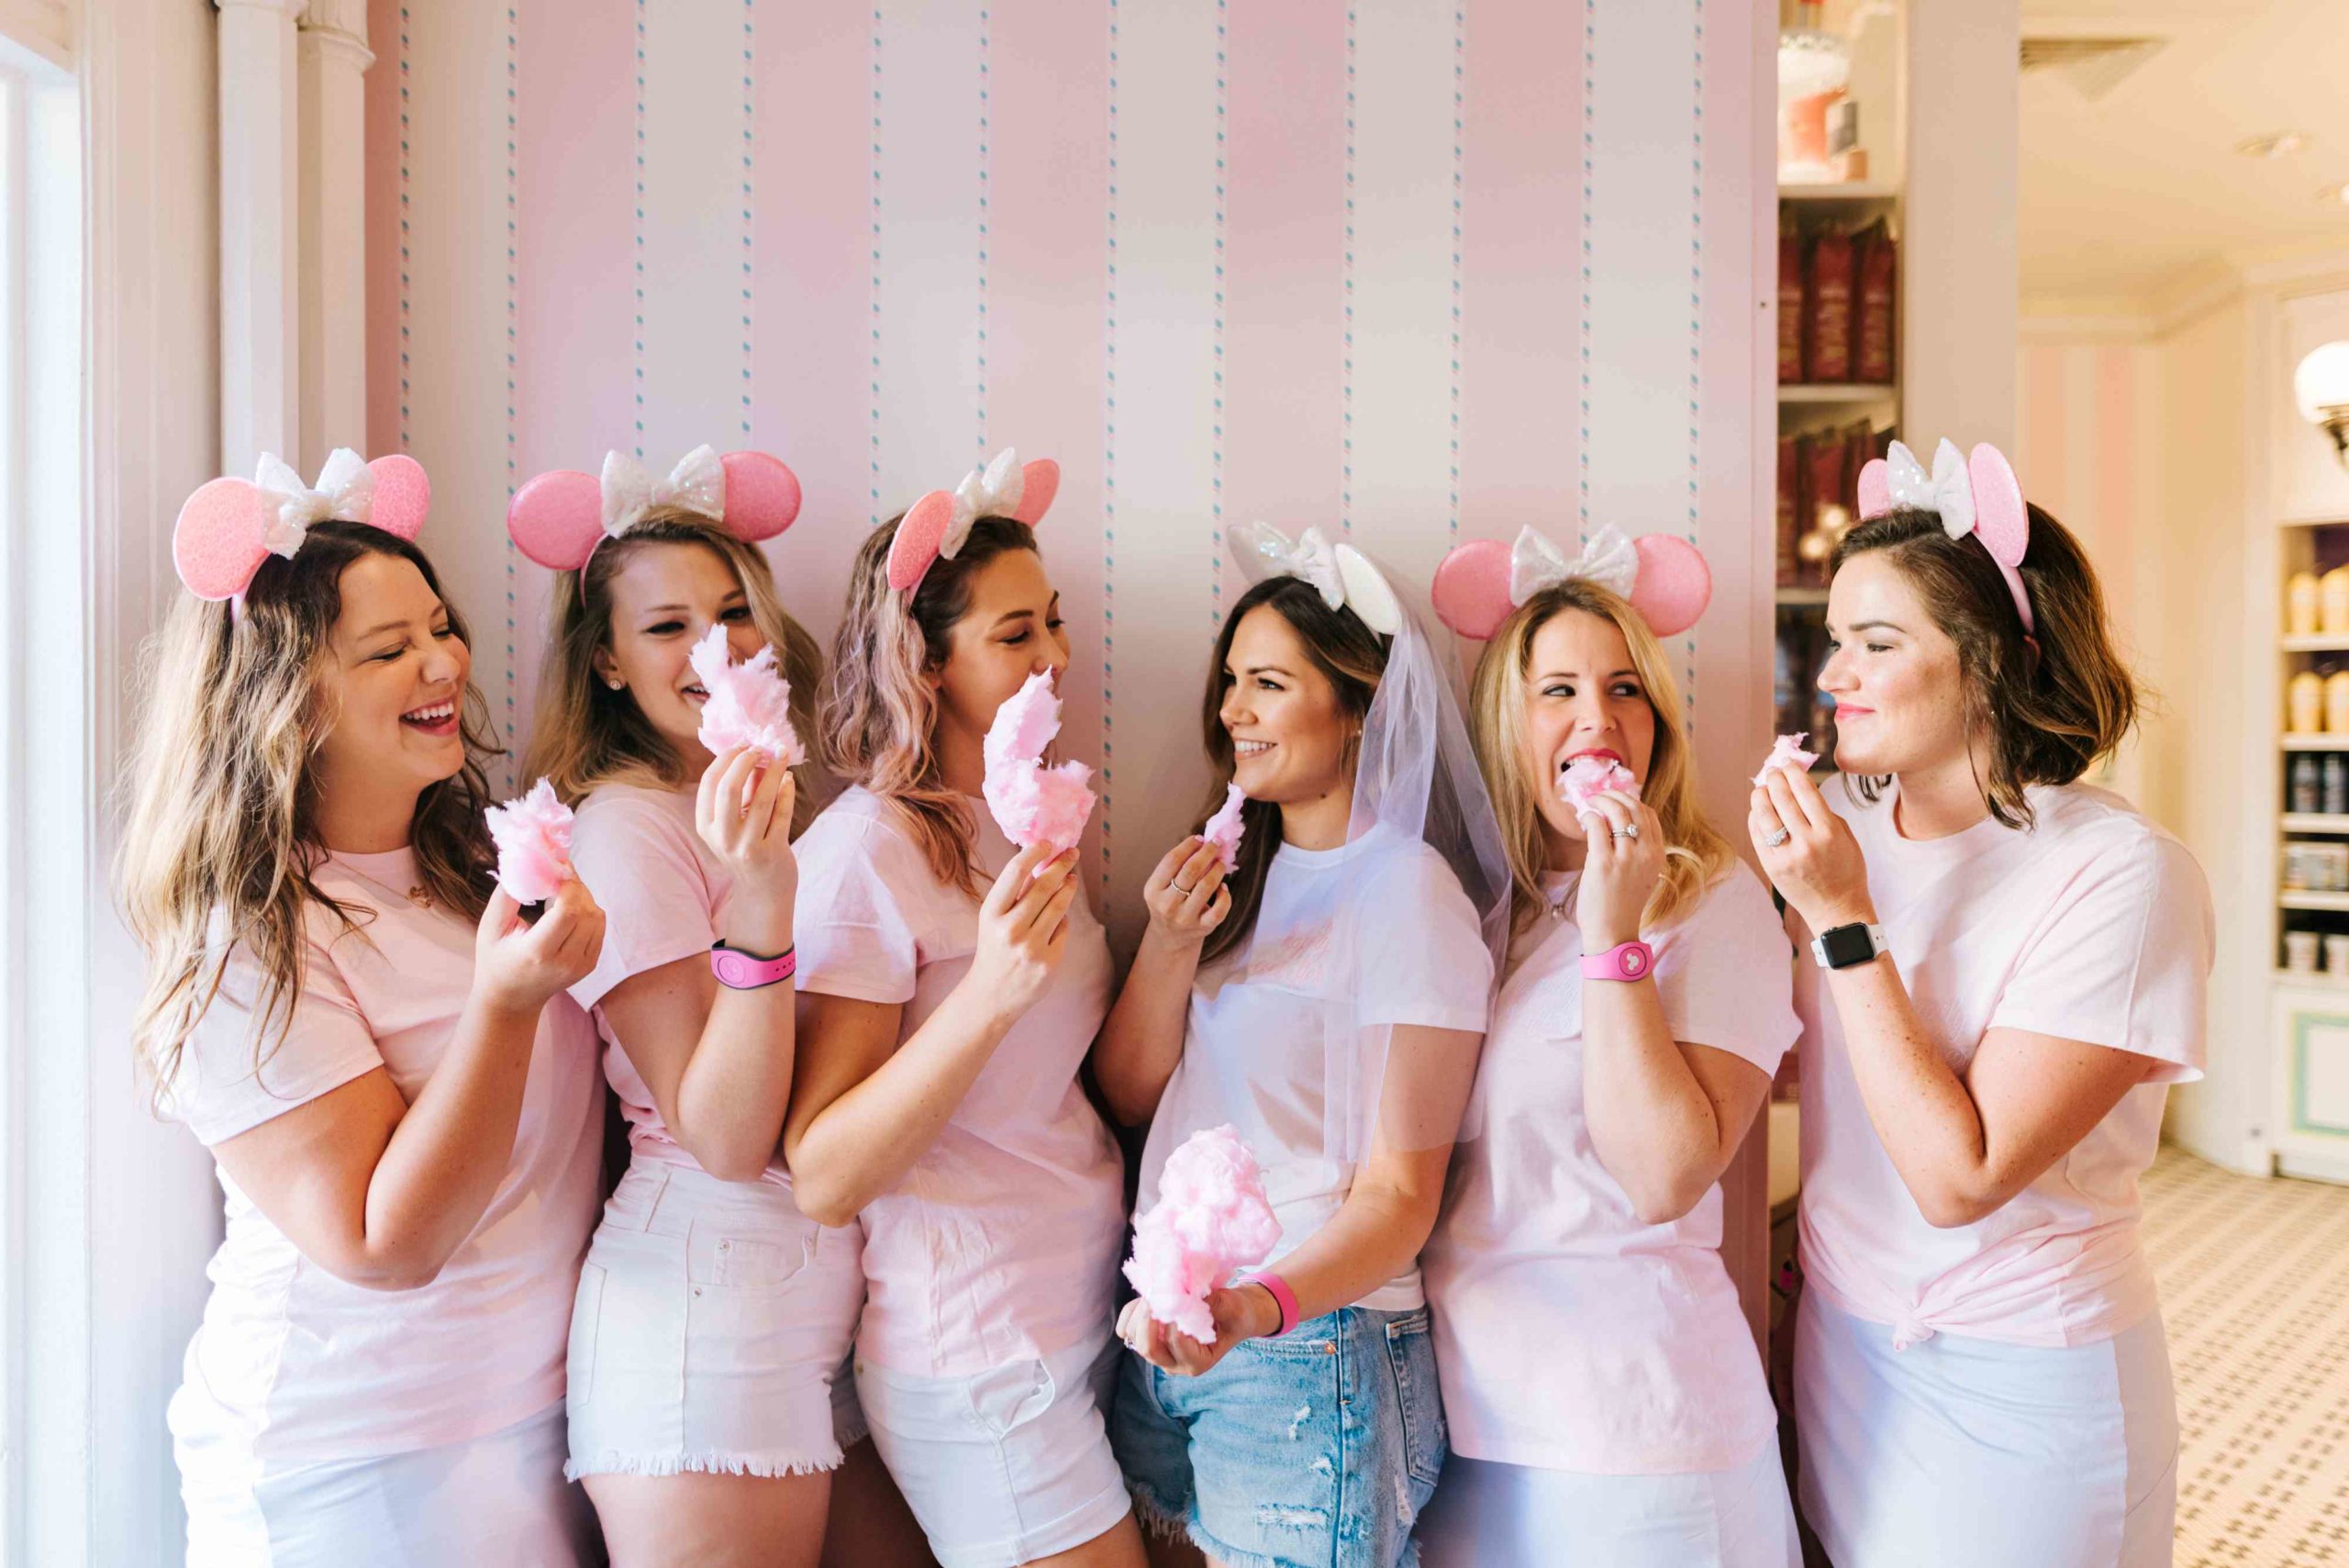 Who usually attends a bachelorette party? 